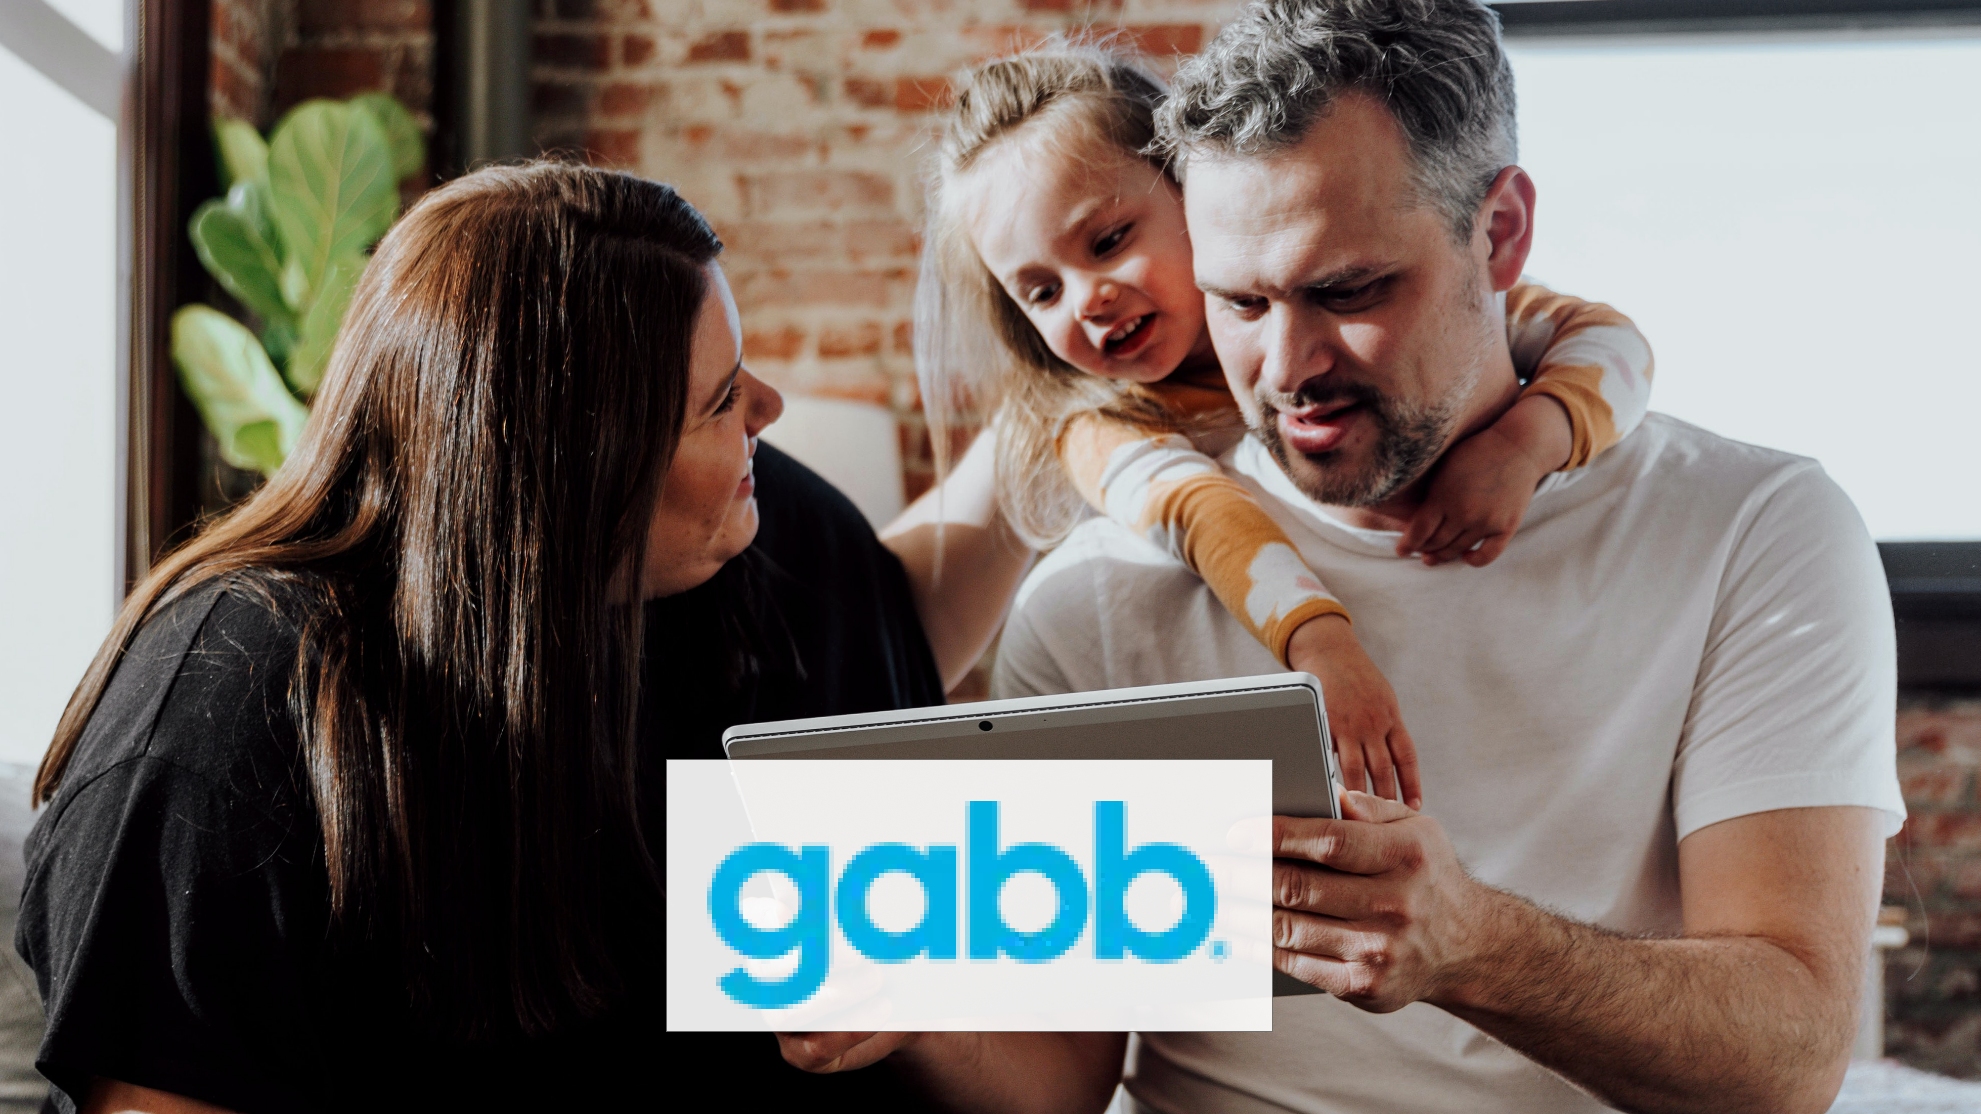 Featured image for “Gabb Wireless brings hundreds of jobs to Lehi City”